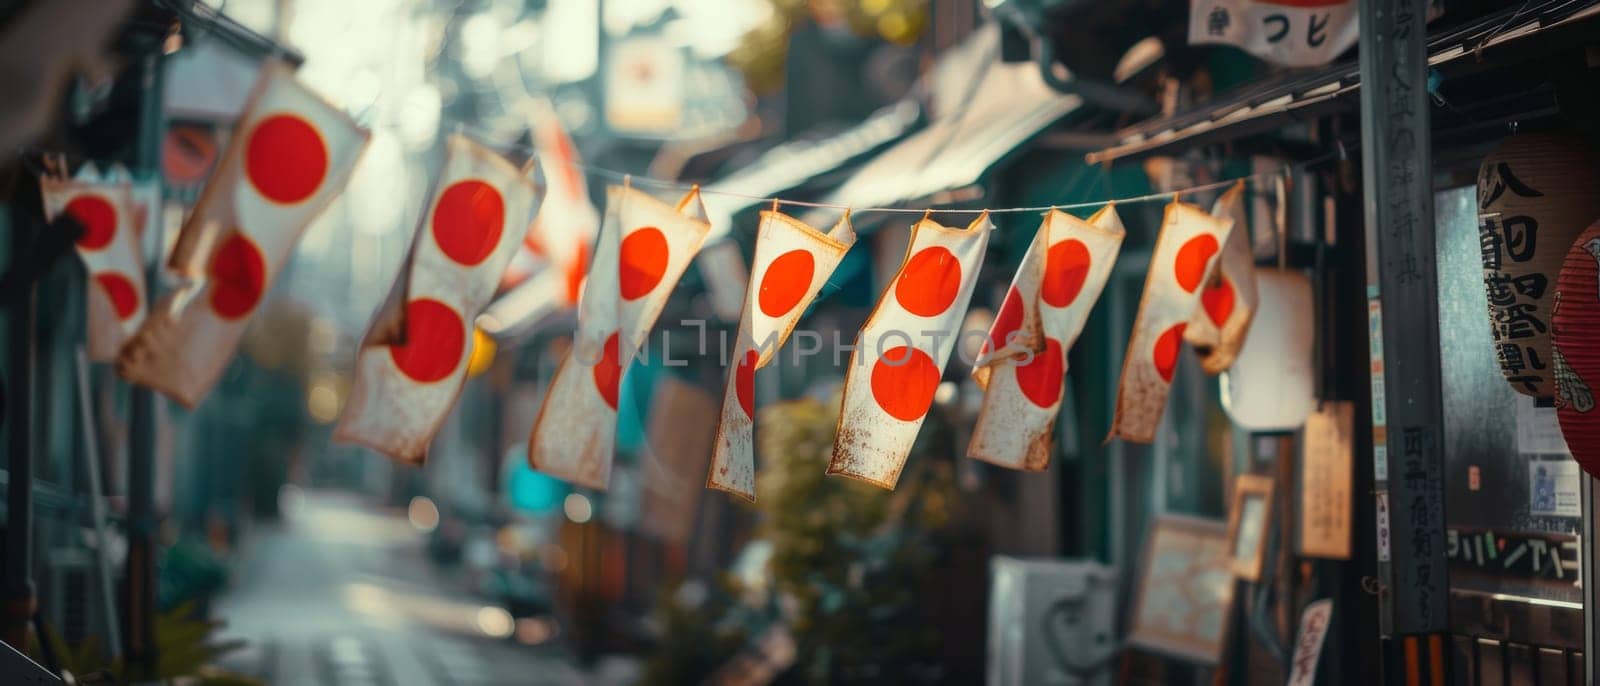 A serene Japanese street illuminated by the gentle glow of hanging flags, bearing the red and white motif, evoking a sense of tradition and community. by sfinks